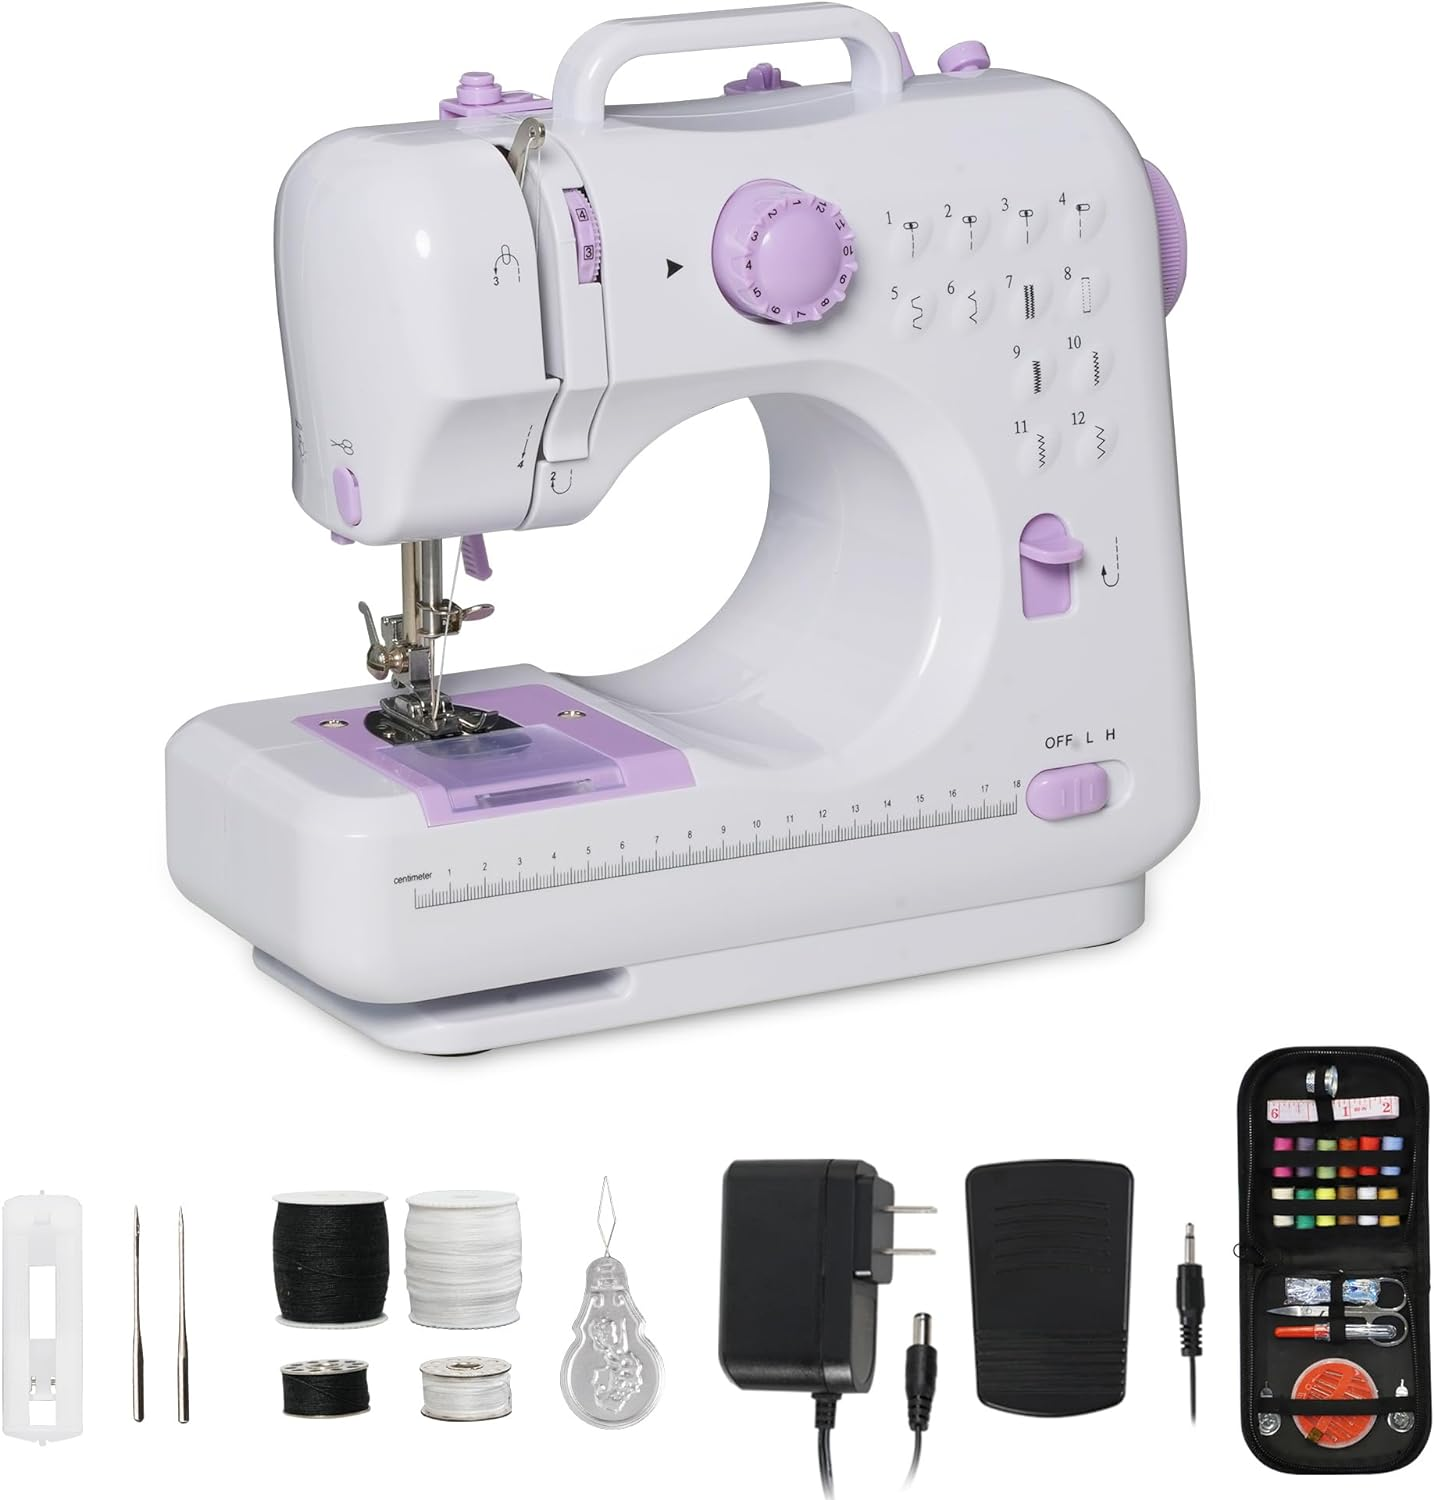 Portable Sewing Machine Mini Electric Household Crafting Mending Sewing  Machines Multi-Purpose 12 Built-in Stitches with Foot Pedal for Home  Sewing